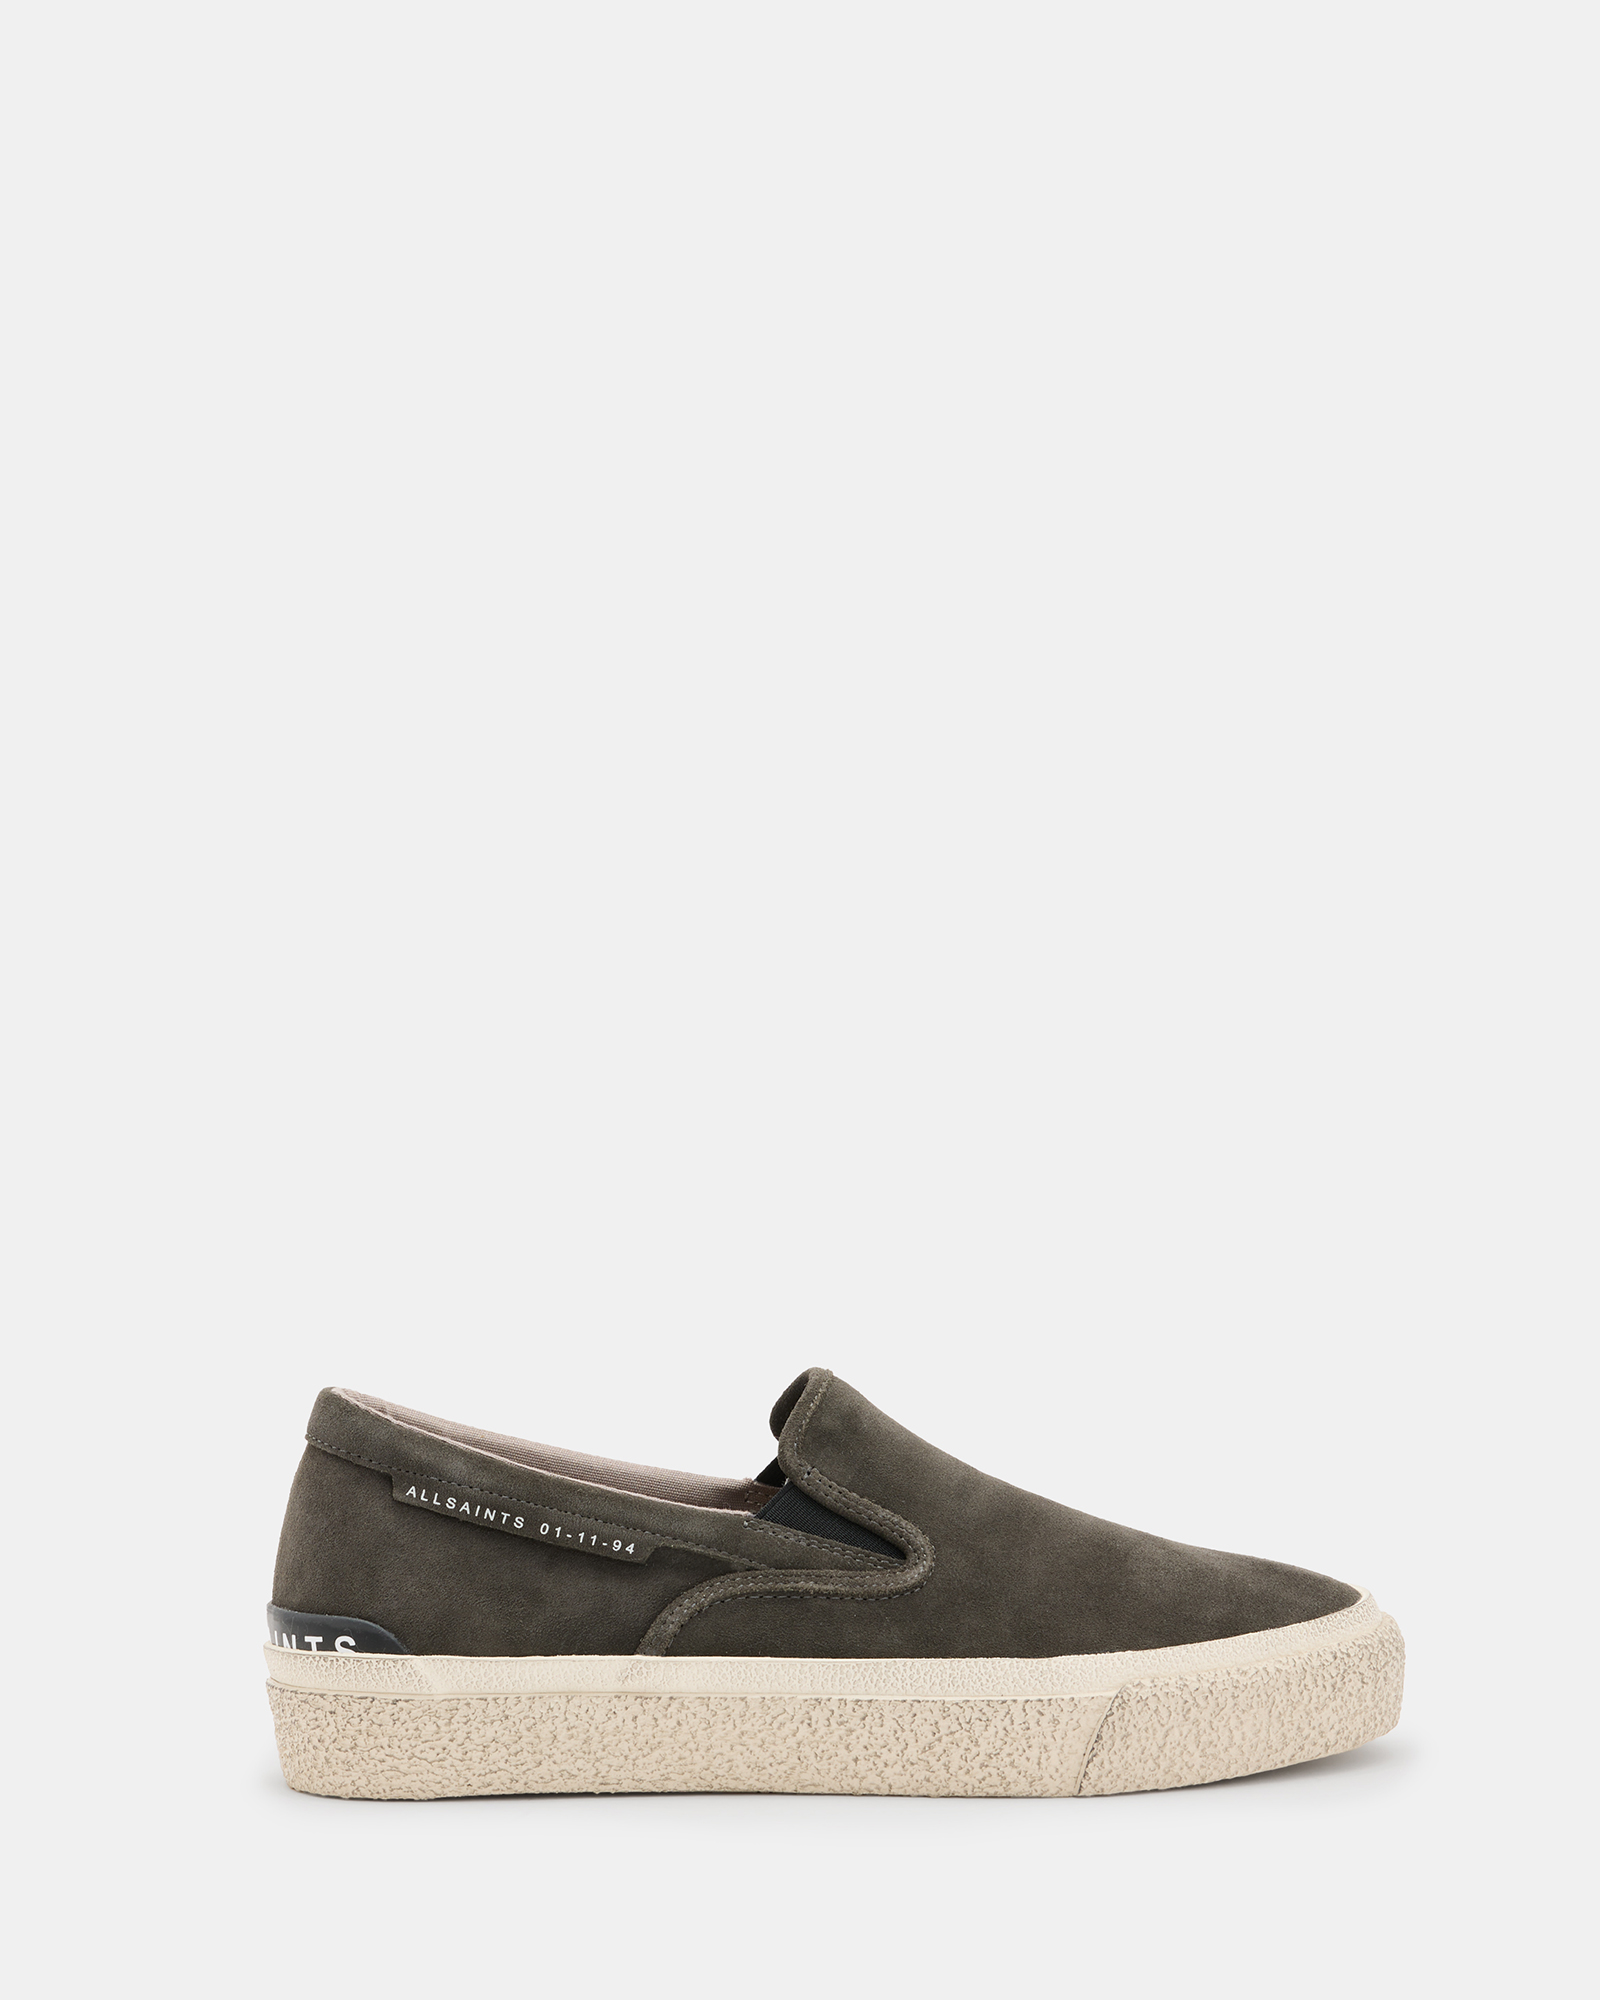 AllSaints Navaho Suede Slip On Trainers